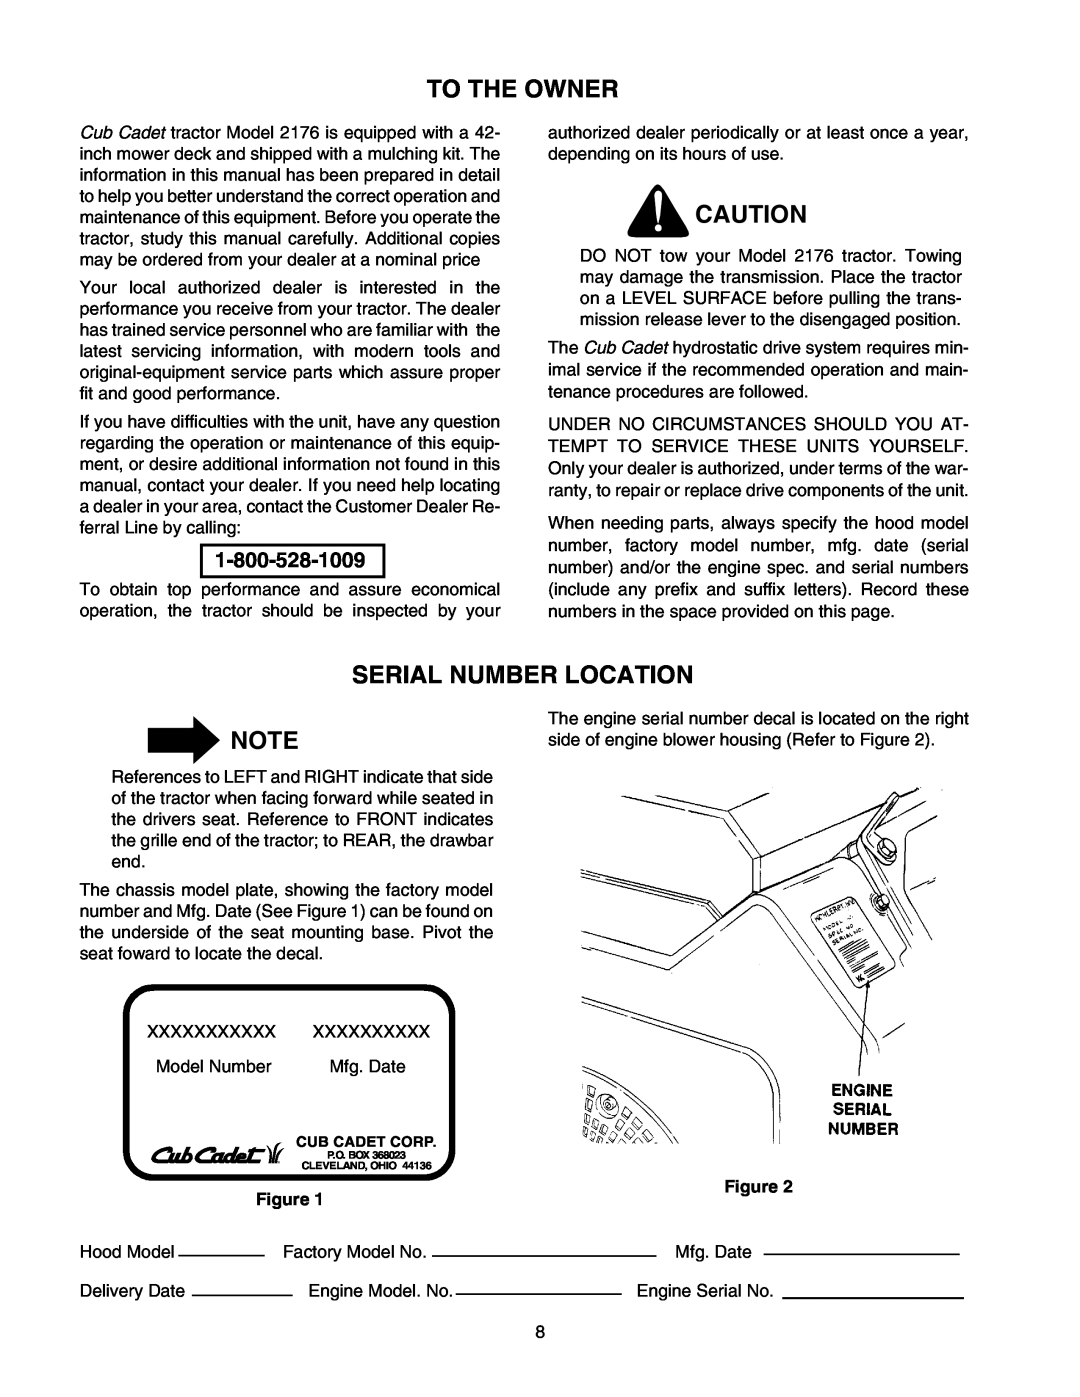 Cub Cadet 2176 manual To The Owner, Serial Number Location, Cub Cadet Corp 